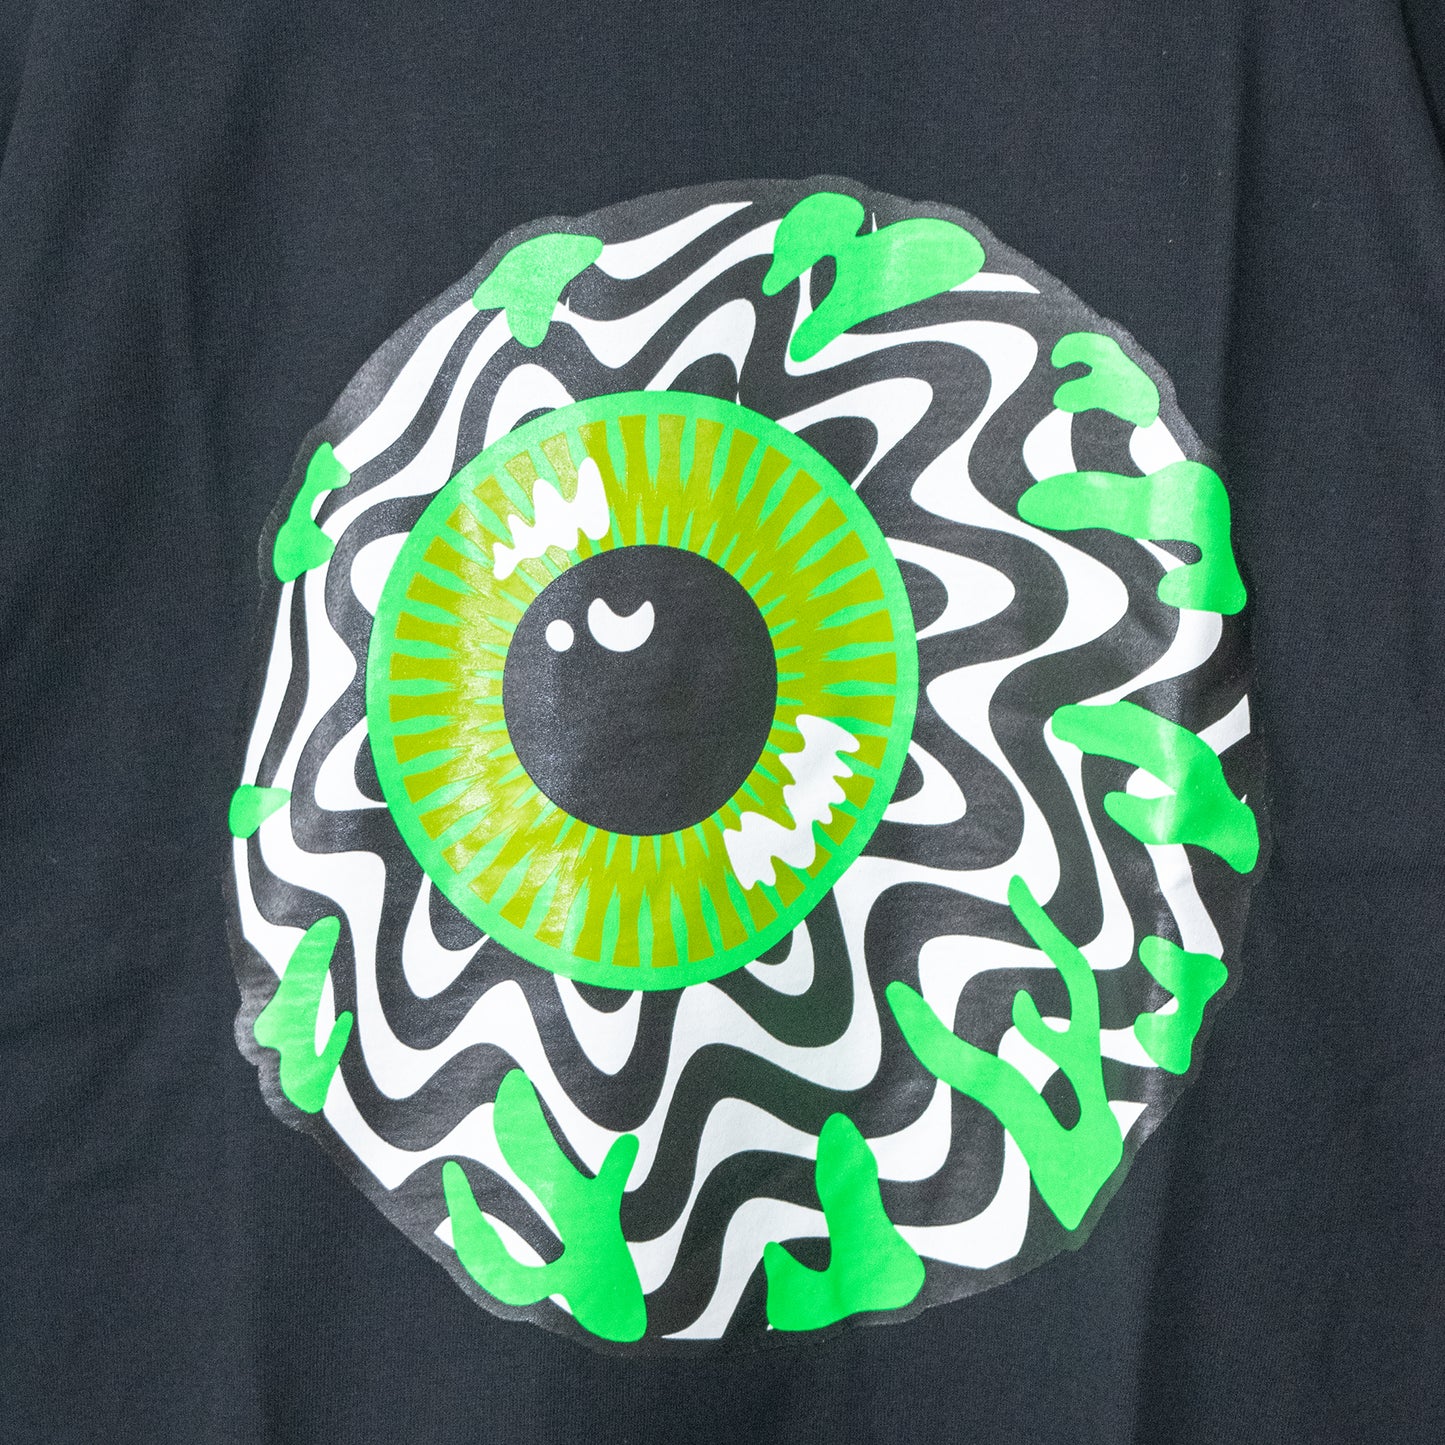 MISHKA Optic Keep Watch S/S T-shirt (BLACK/95238BLK) - YOUAREMYPOISON